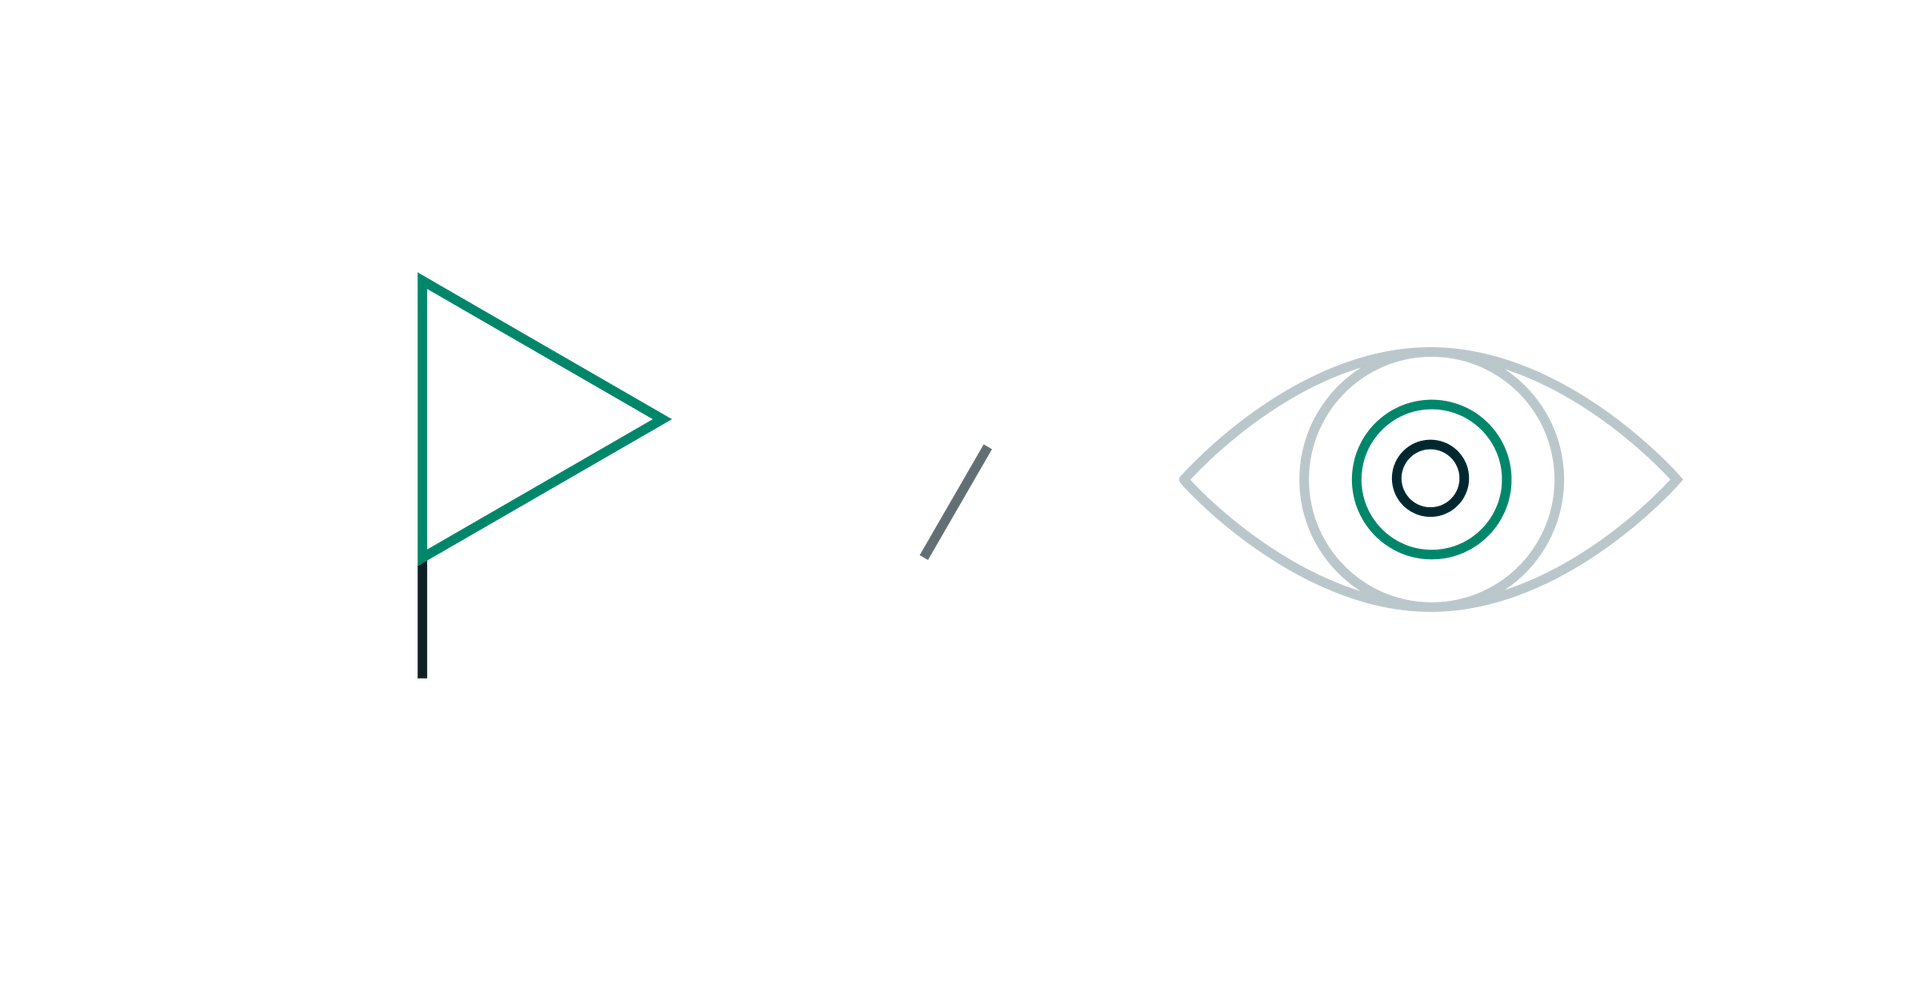 A green flag with hollow filling placed to the left of an outline of an eye, with the iris also outlined in green, to signal mission vs. vision